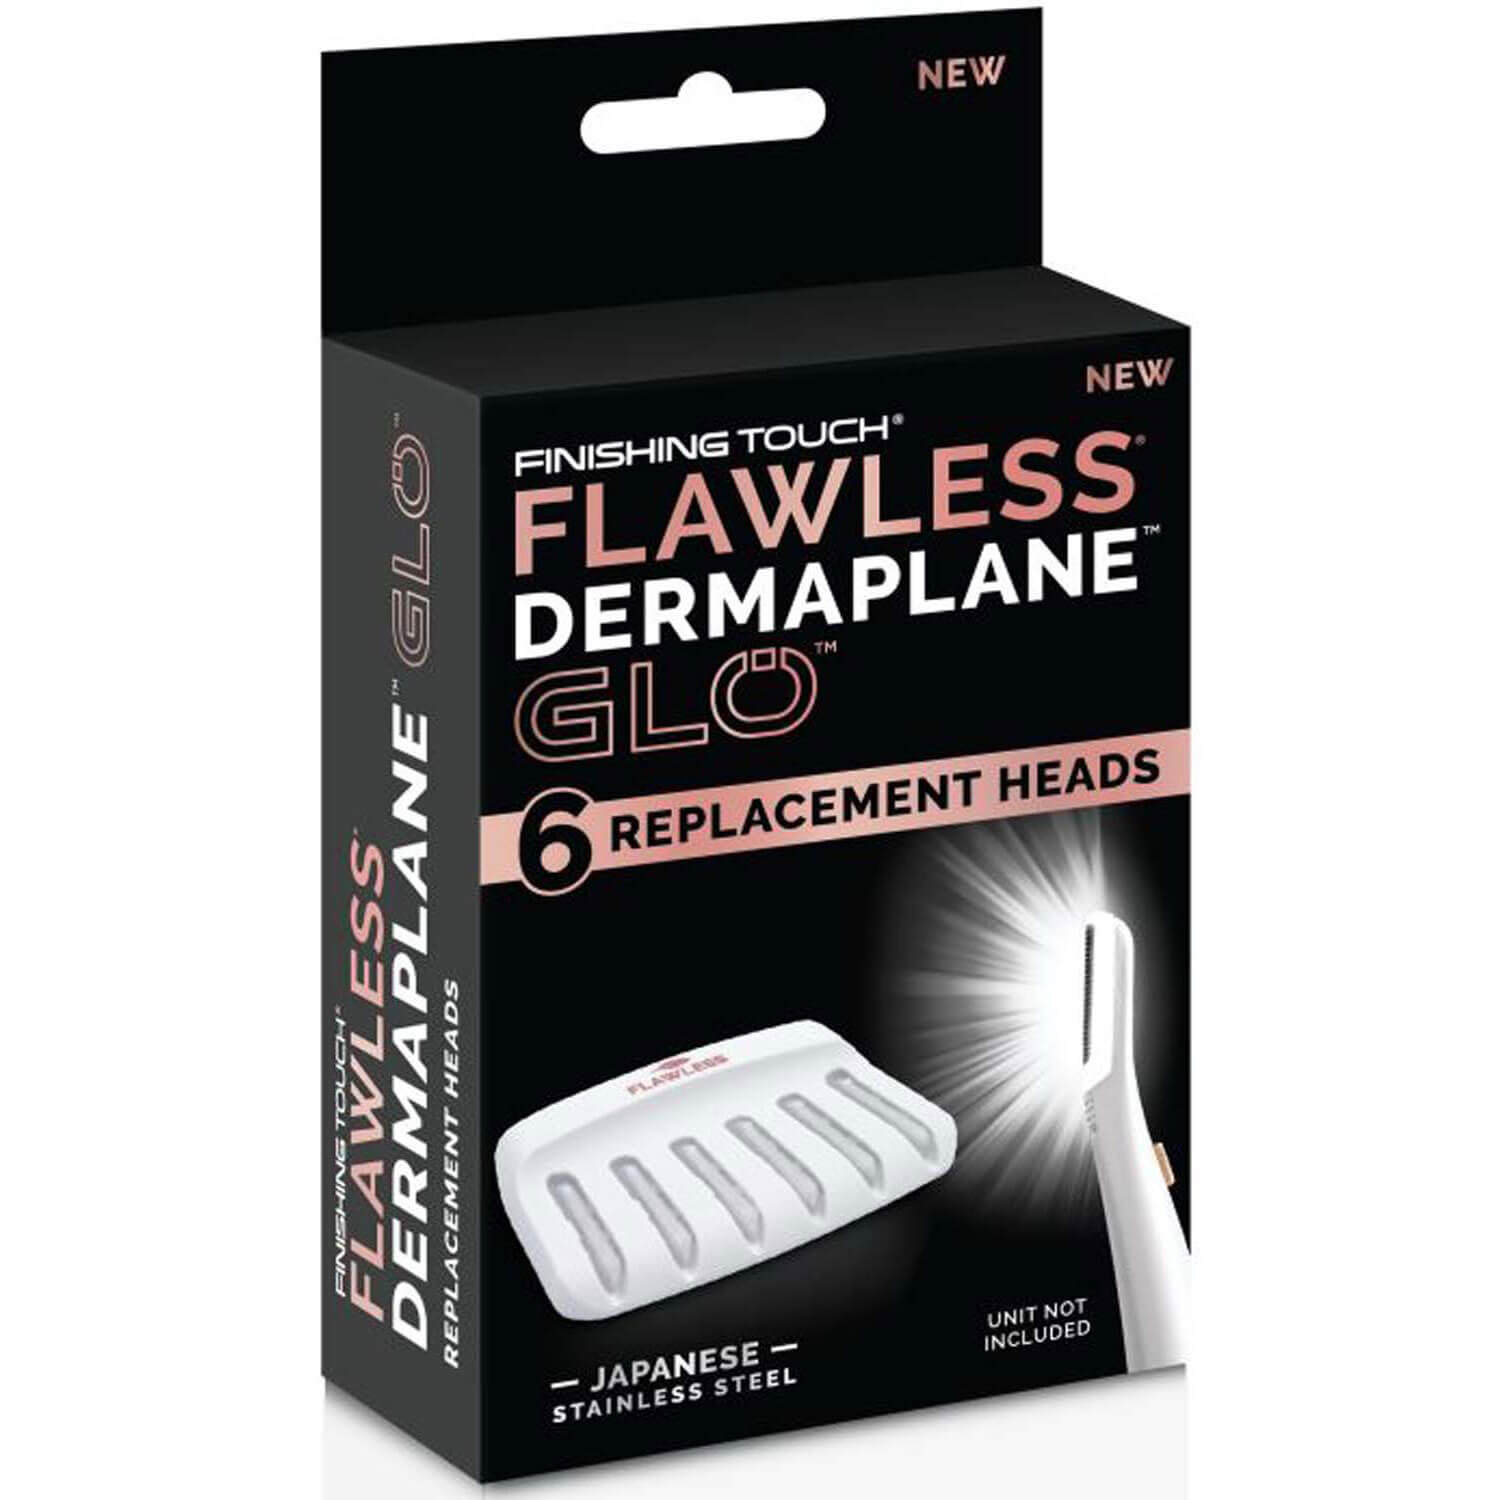 Flawless Dermaplane Glo Replacement Heads 1 Shaws Department Stores